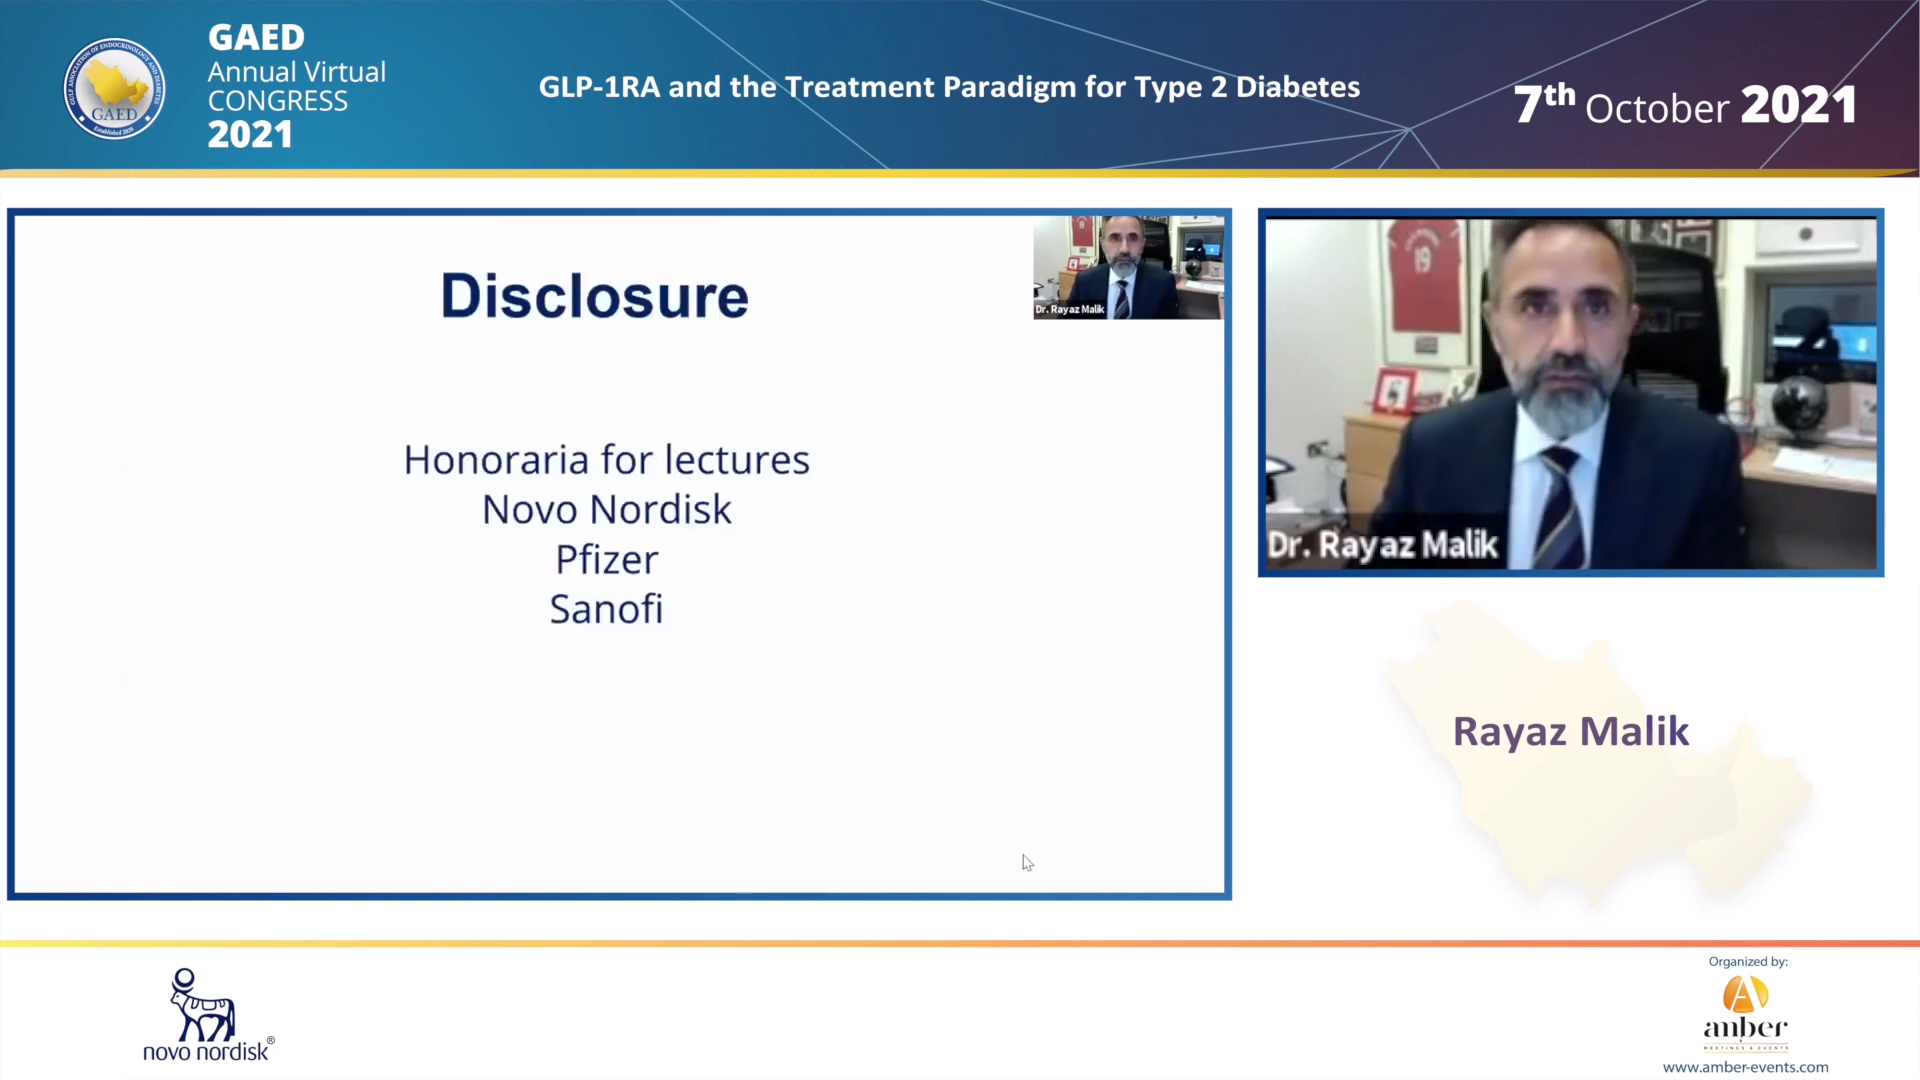 7.10.21 - Day 1, Novo Nordisk - GLP-1RA and the Treatment Paradigm for Type 2 Diabetes